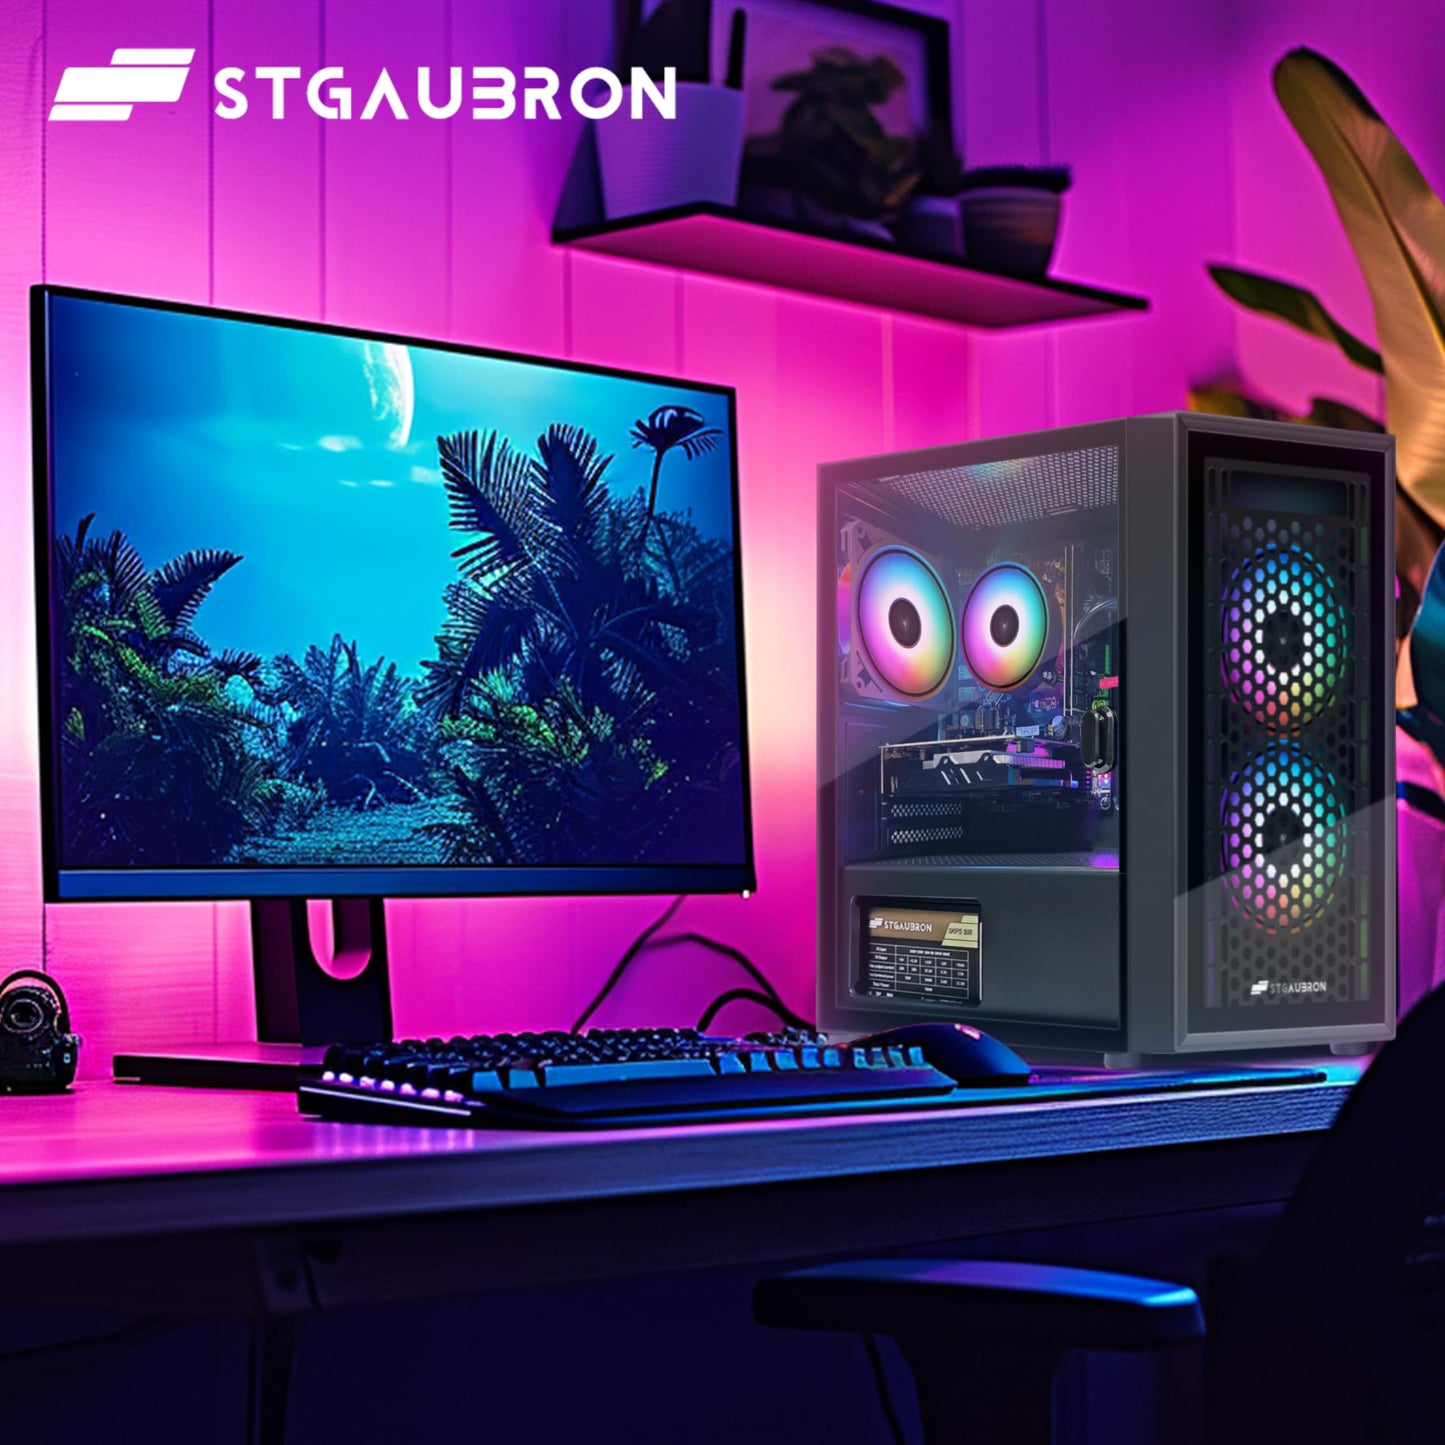 STGAubron Gaming Desktop PC, Intel Core i5 3.2G up to 3.6G, Radeon RX 560 4G GDDR5, 16G RAM, 512G SSD, 600M WiFi, BT 5.0, RGB Fan x 3, RGB Keyboard & Mouse & Mouse Pad, W10H64